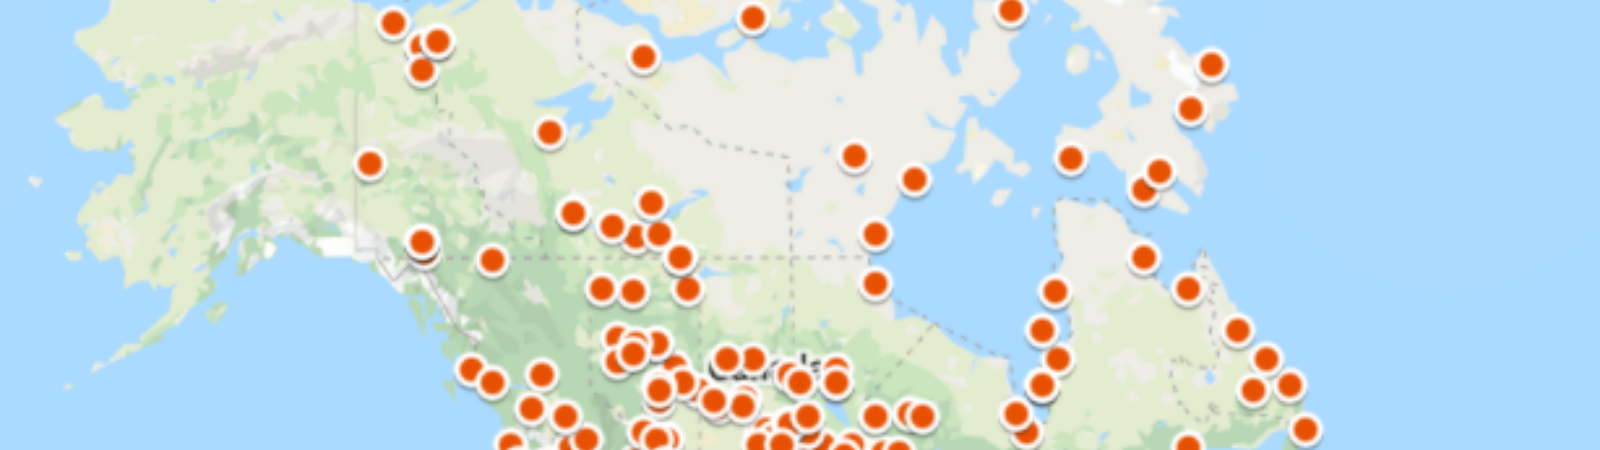 map of canada with red circles where residential schools were